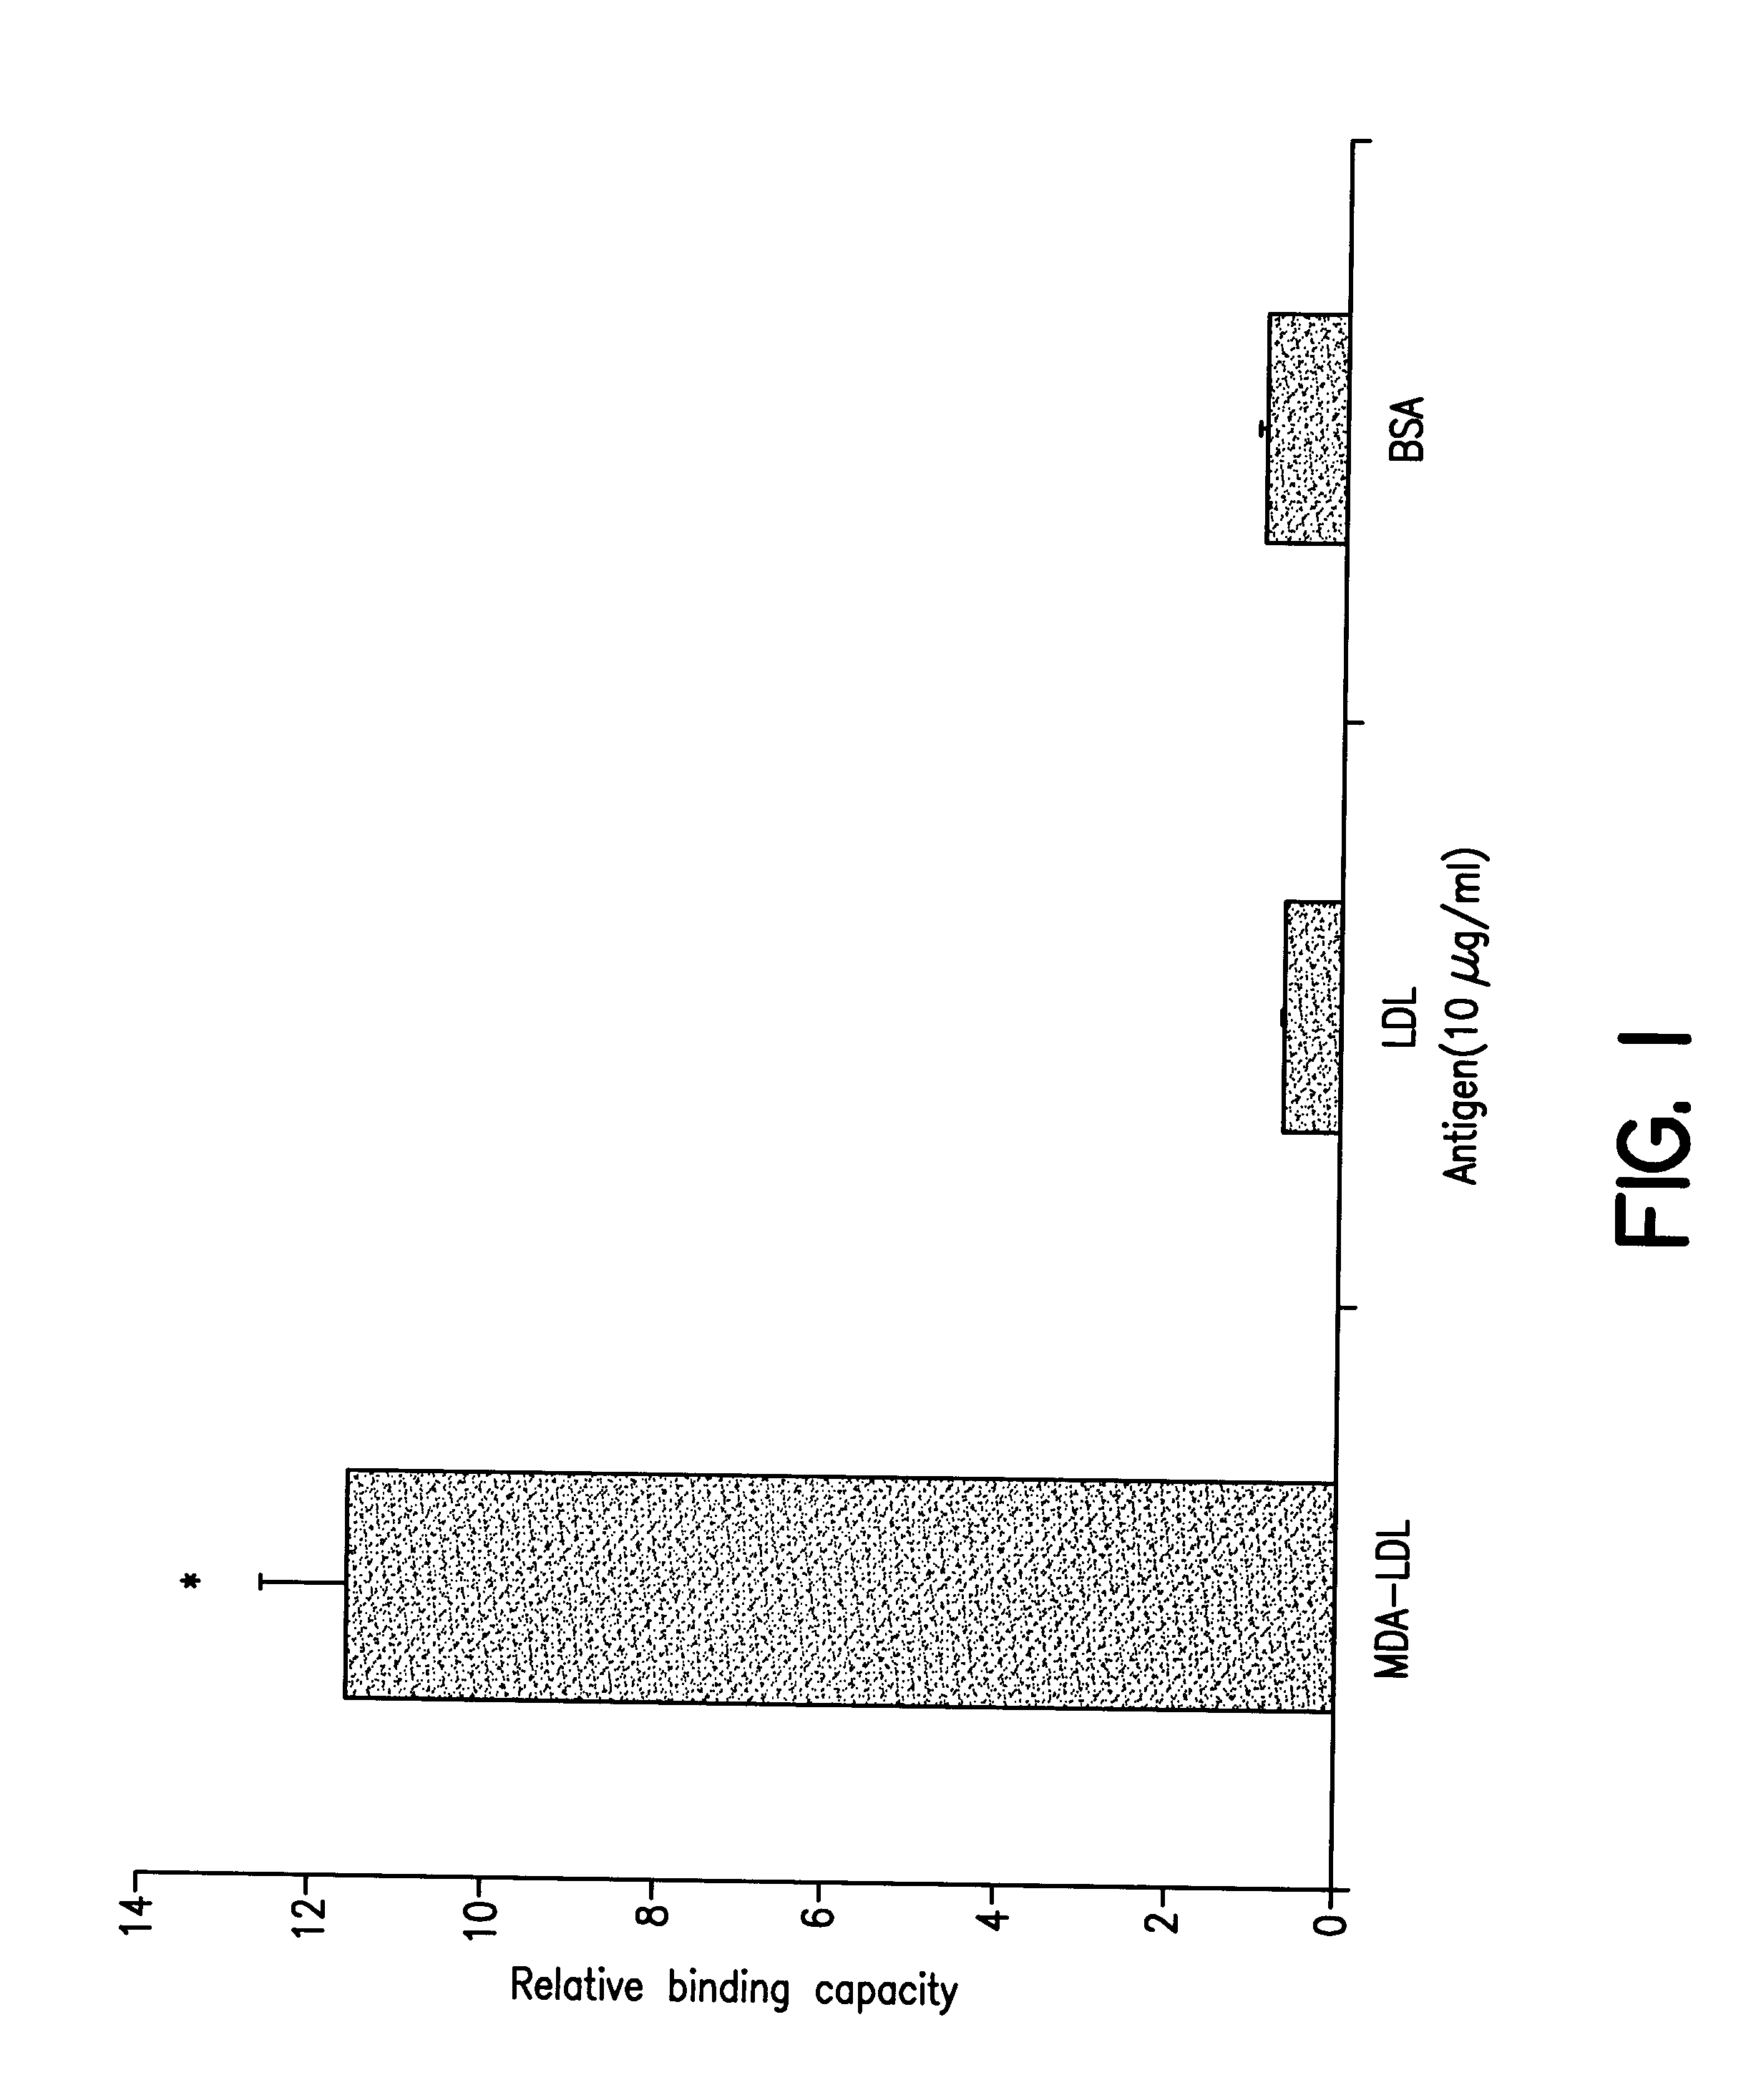 Methods and reagents for non-invasive imaging of atherosclerotic plaque